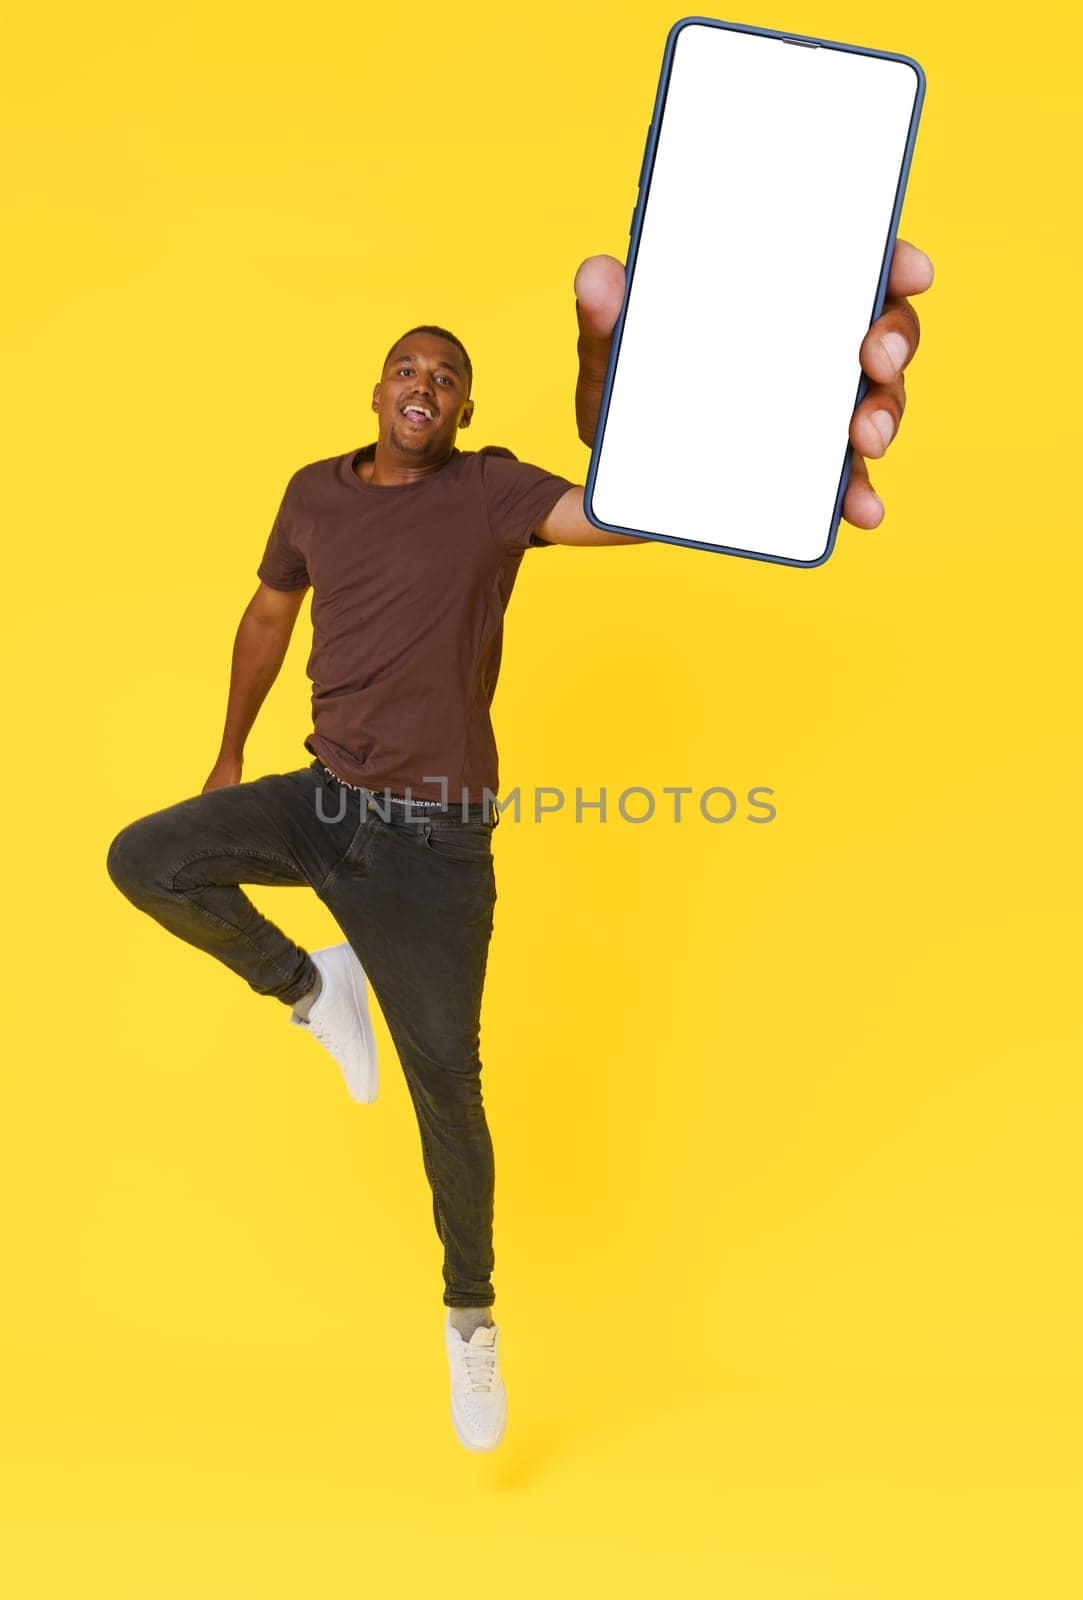 Energetic African American student is captured jumping with mobile phone featuring empty white screen in hand, on yellow background. This image is perfect for product placement or advertising concepts. High quality photo